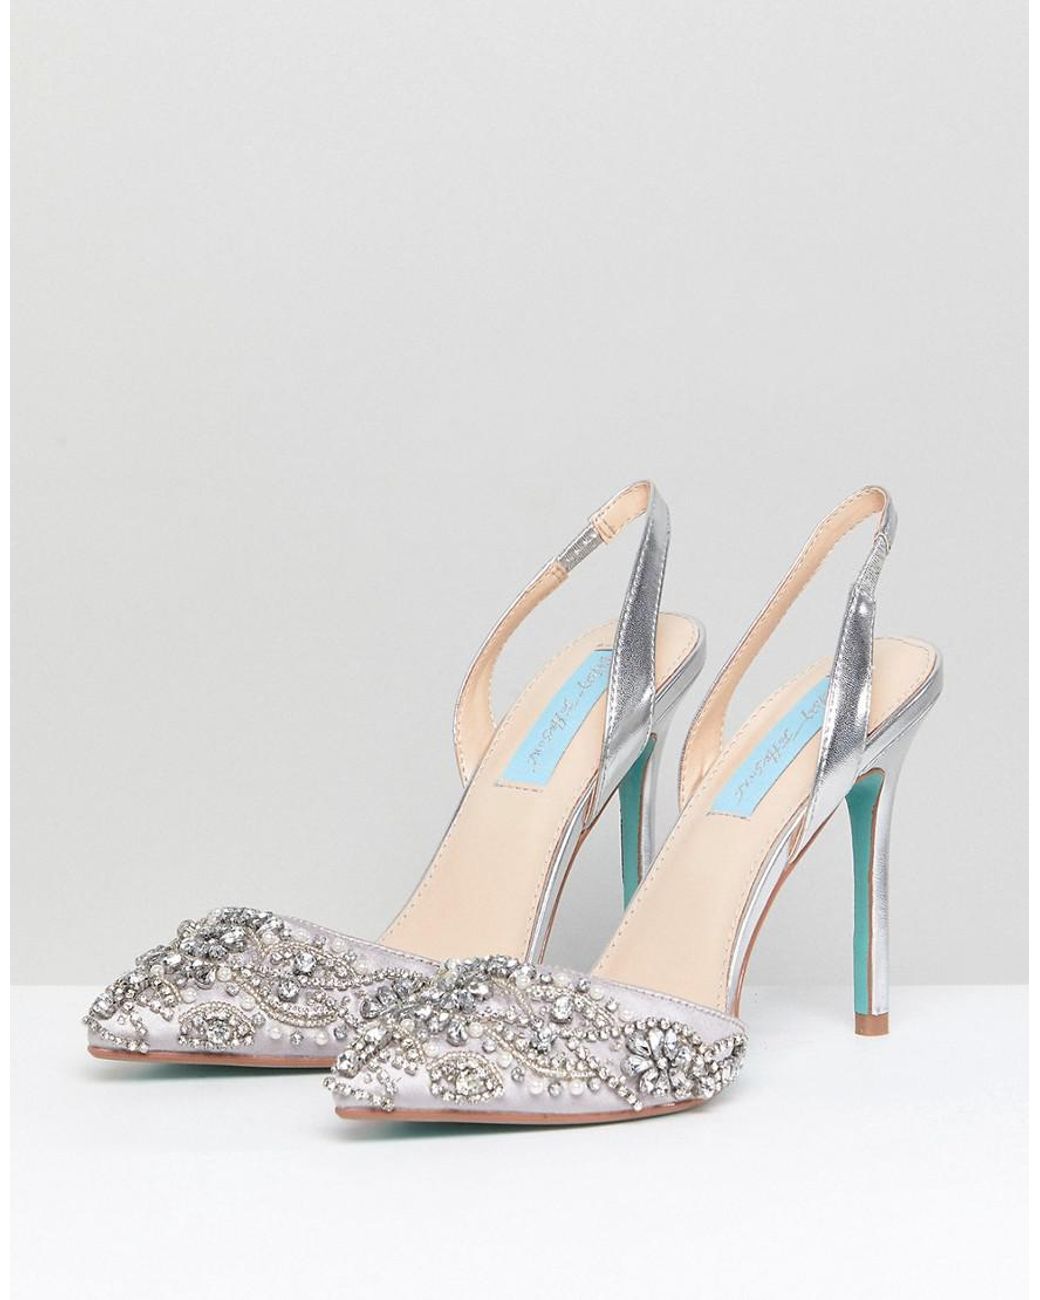 Betsey Johnson Blue By Betsy Johnson Sonia Wedding Embellished Heeled Shoes  in Metallic | Lyst